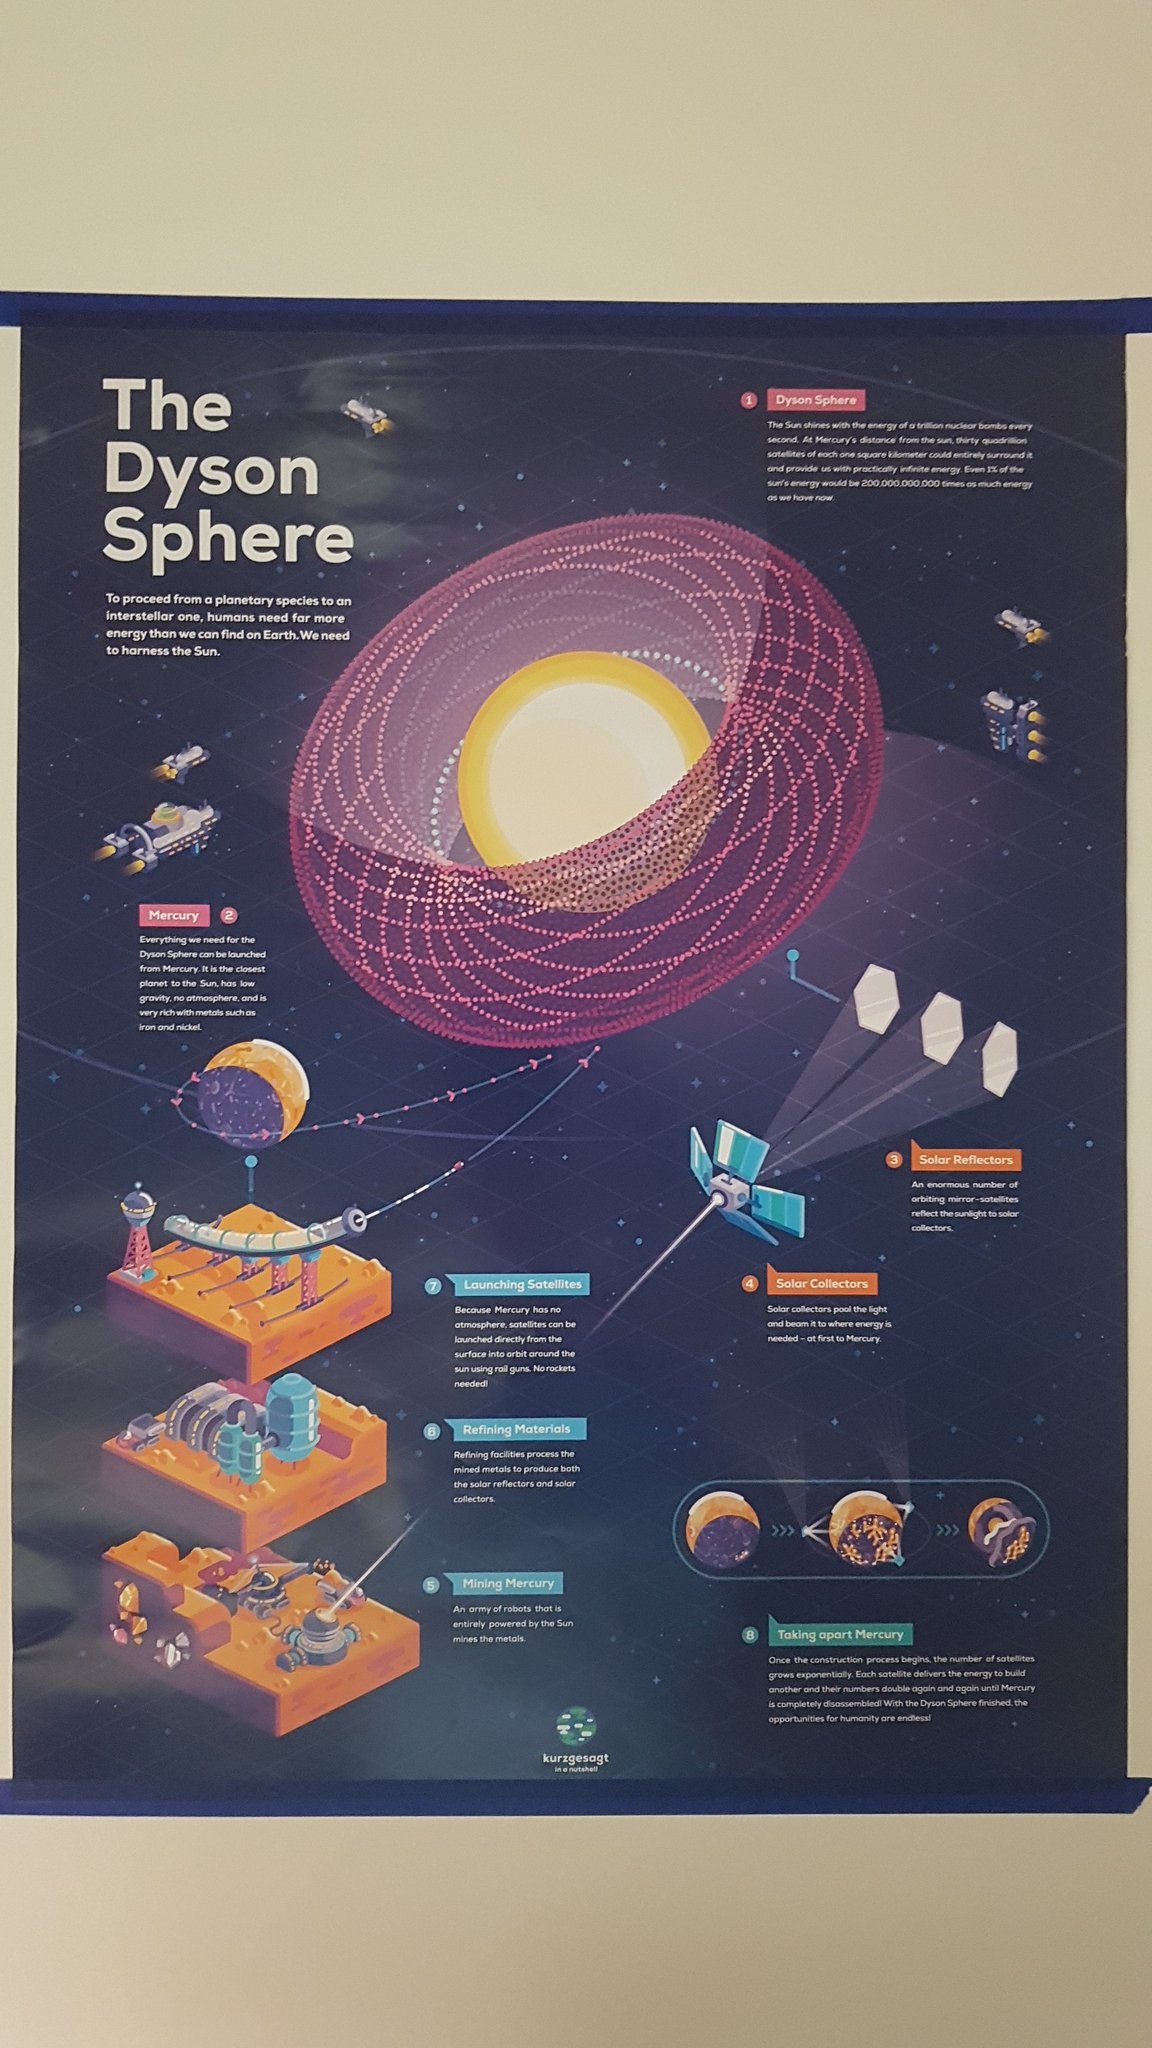 Forbigående Preference Grand Kenny Kim on Twitter: "Awesome Dyson sphere poster from Kurzgesagt! It  would be cool to see it one day in person. https://t.co/sYeo7d9yUW" /  Twitter